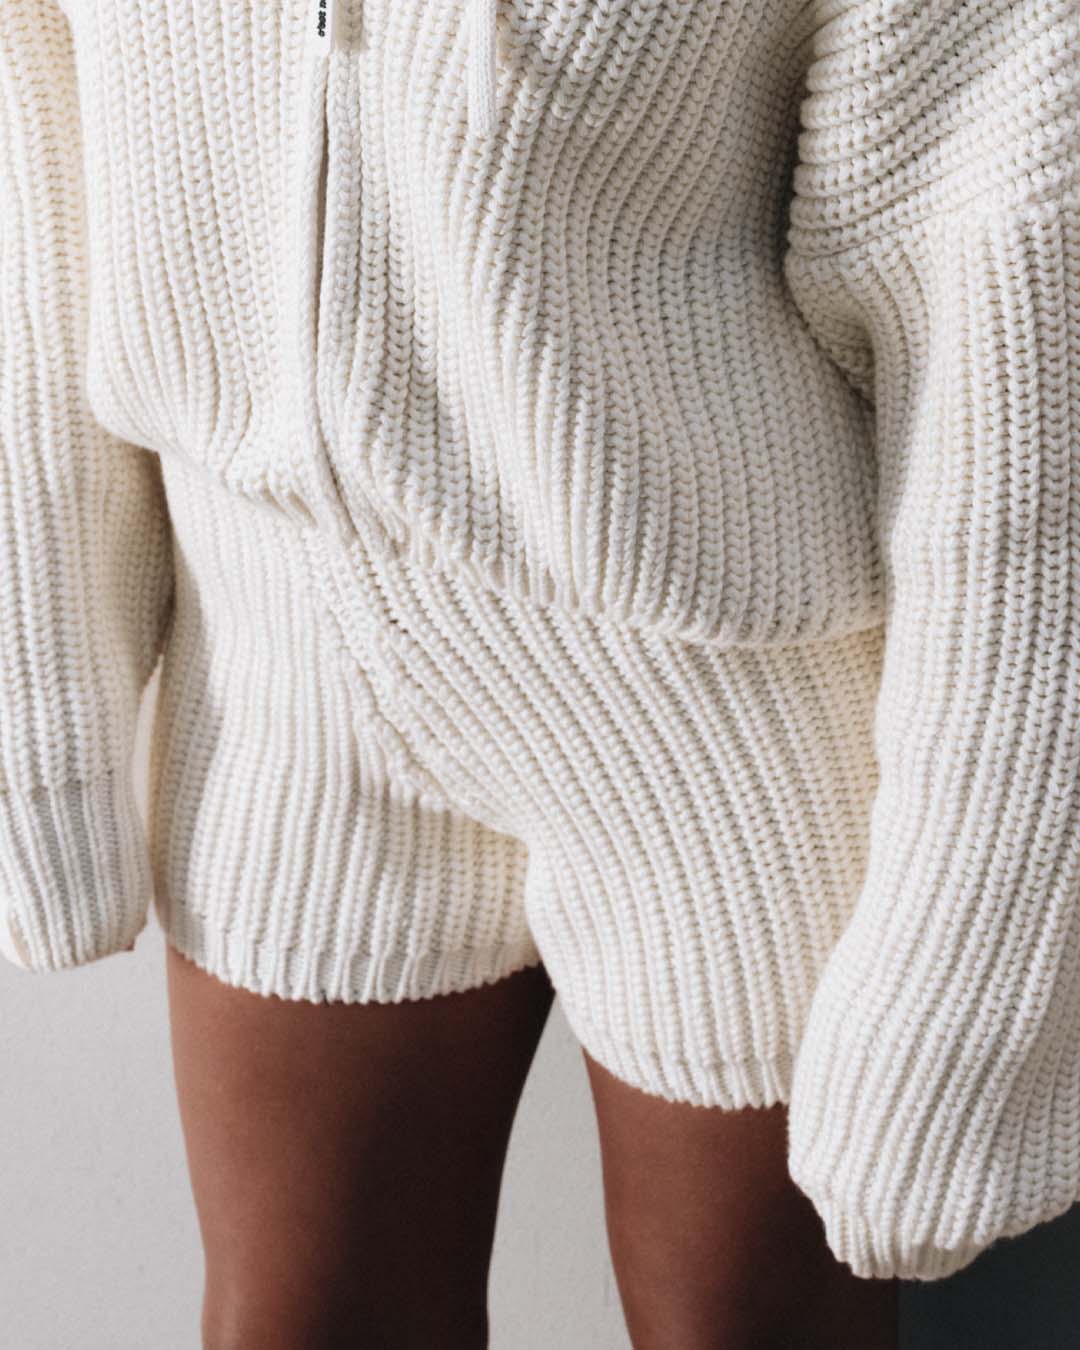 The Knit Shorts | c'est normal - Around here.